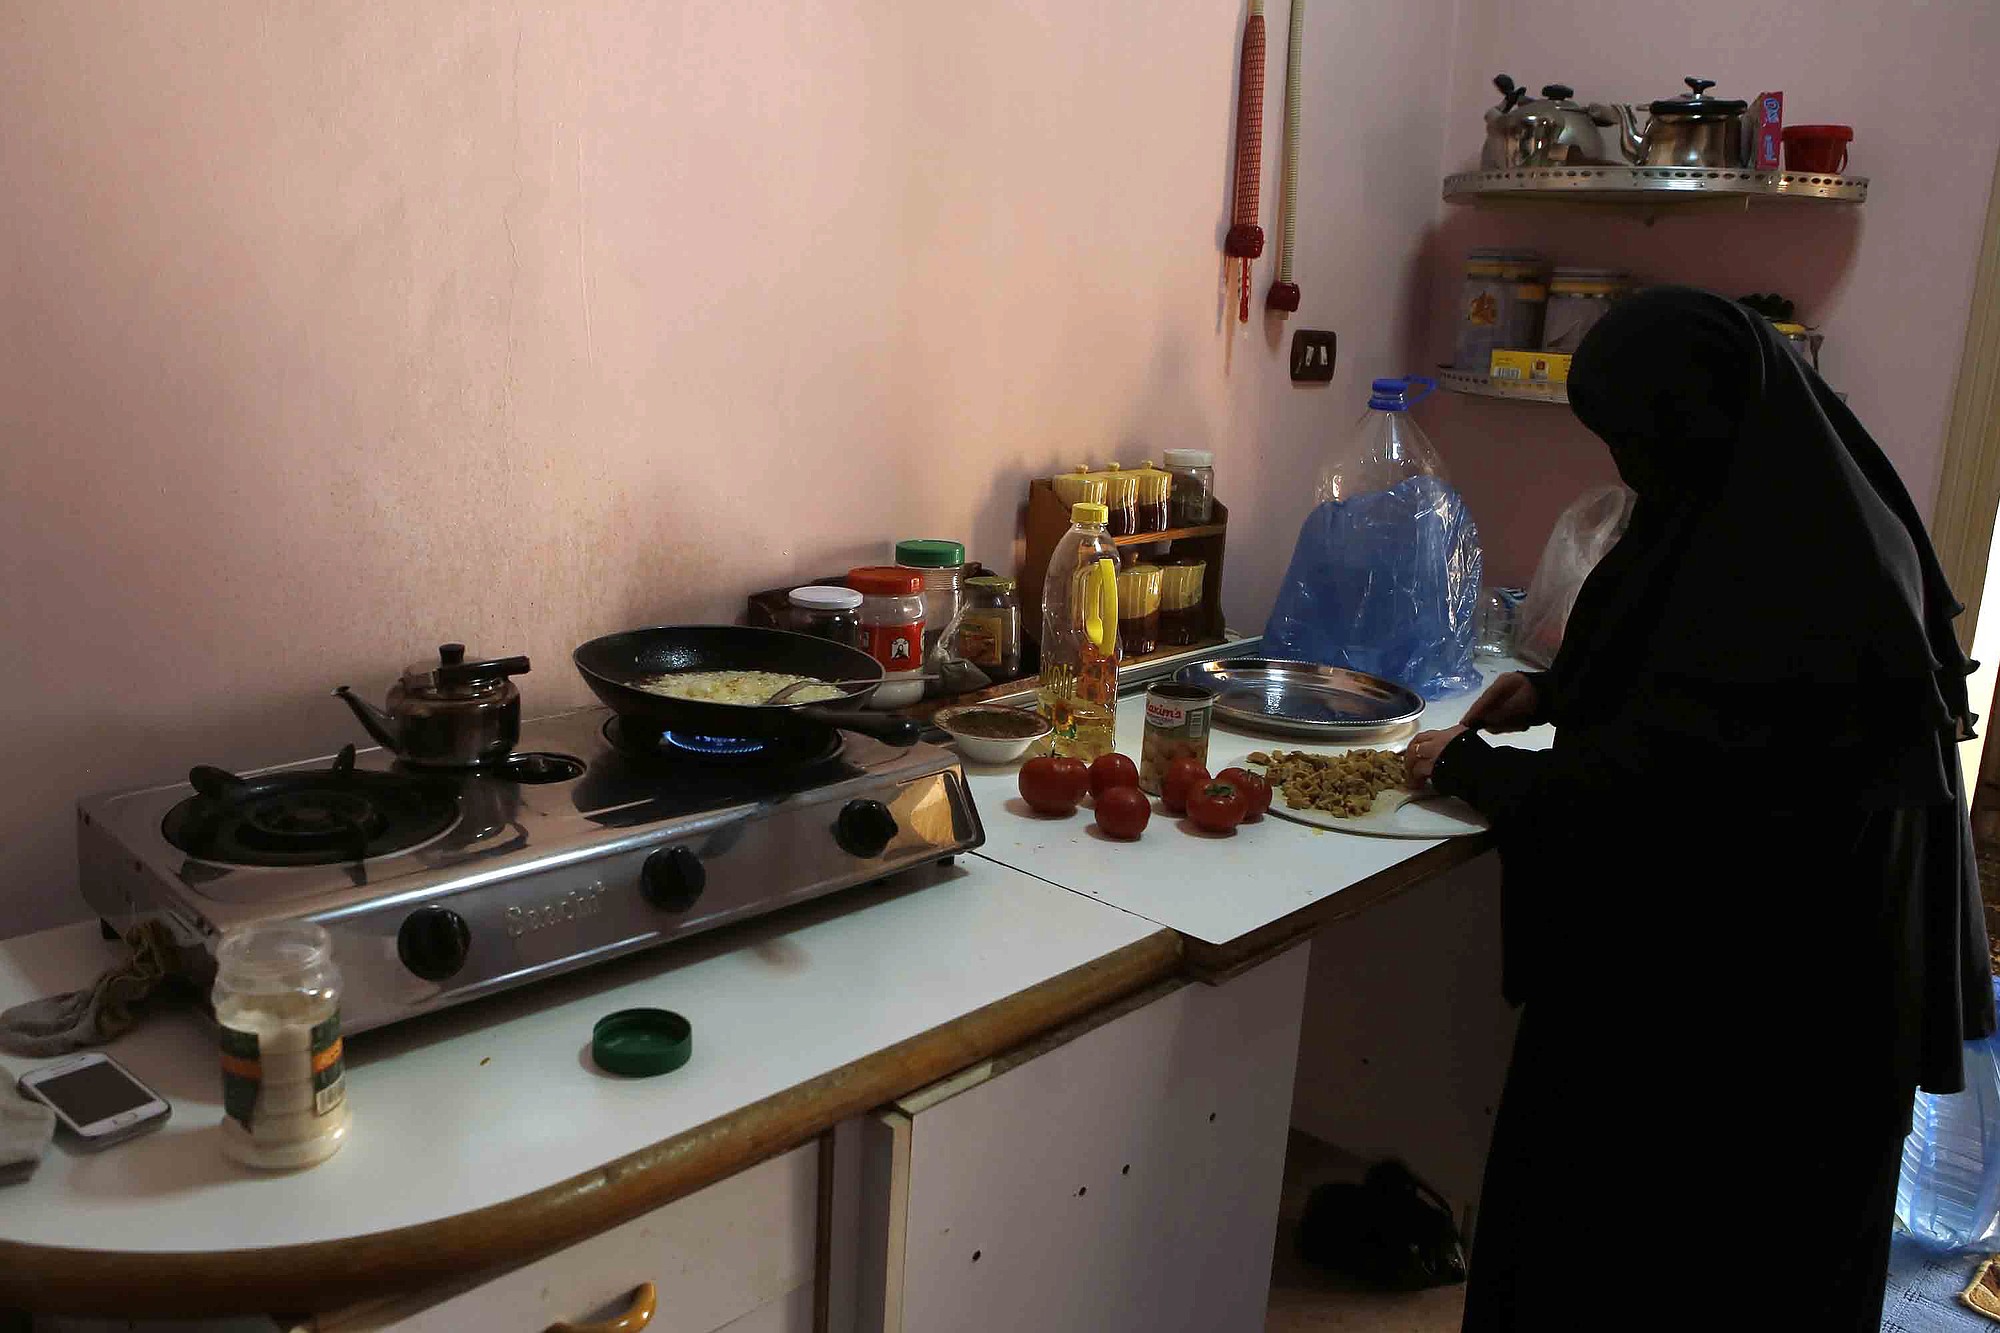 Syrian refugee Rabaa Izzedine, 46, prepares a lunch of fried tomatoes and onions for her husband Issam, 49, in their crowded apartment in Amman, Jordan.